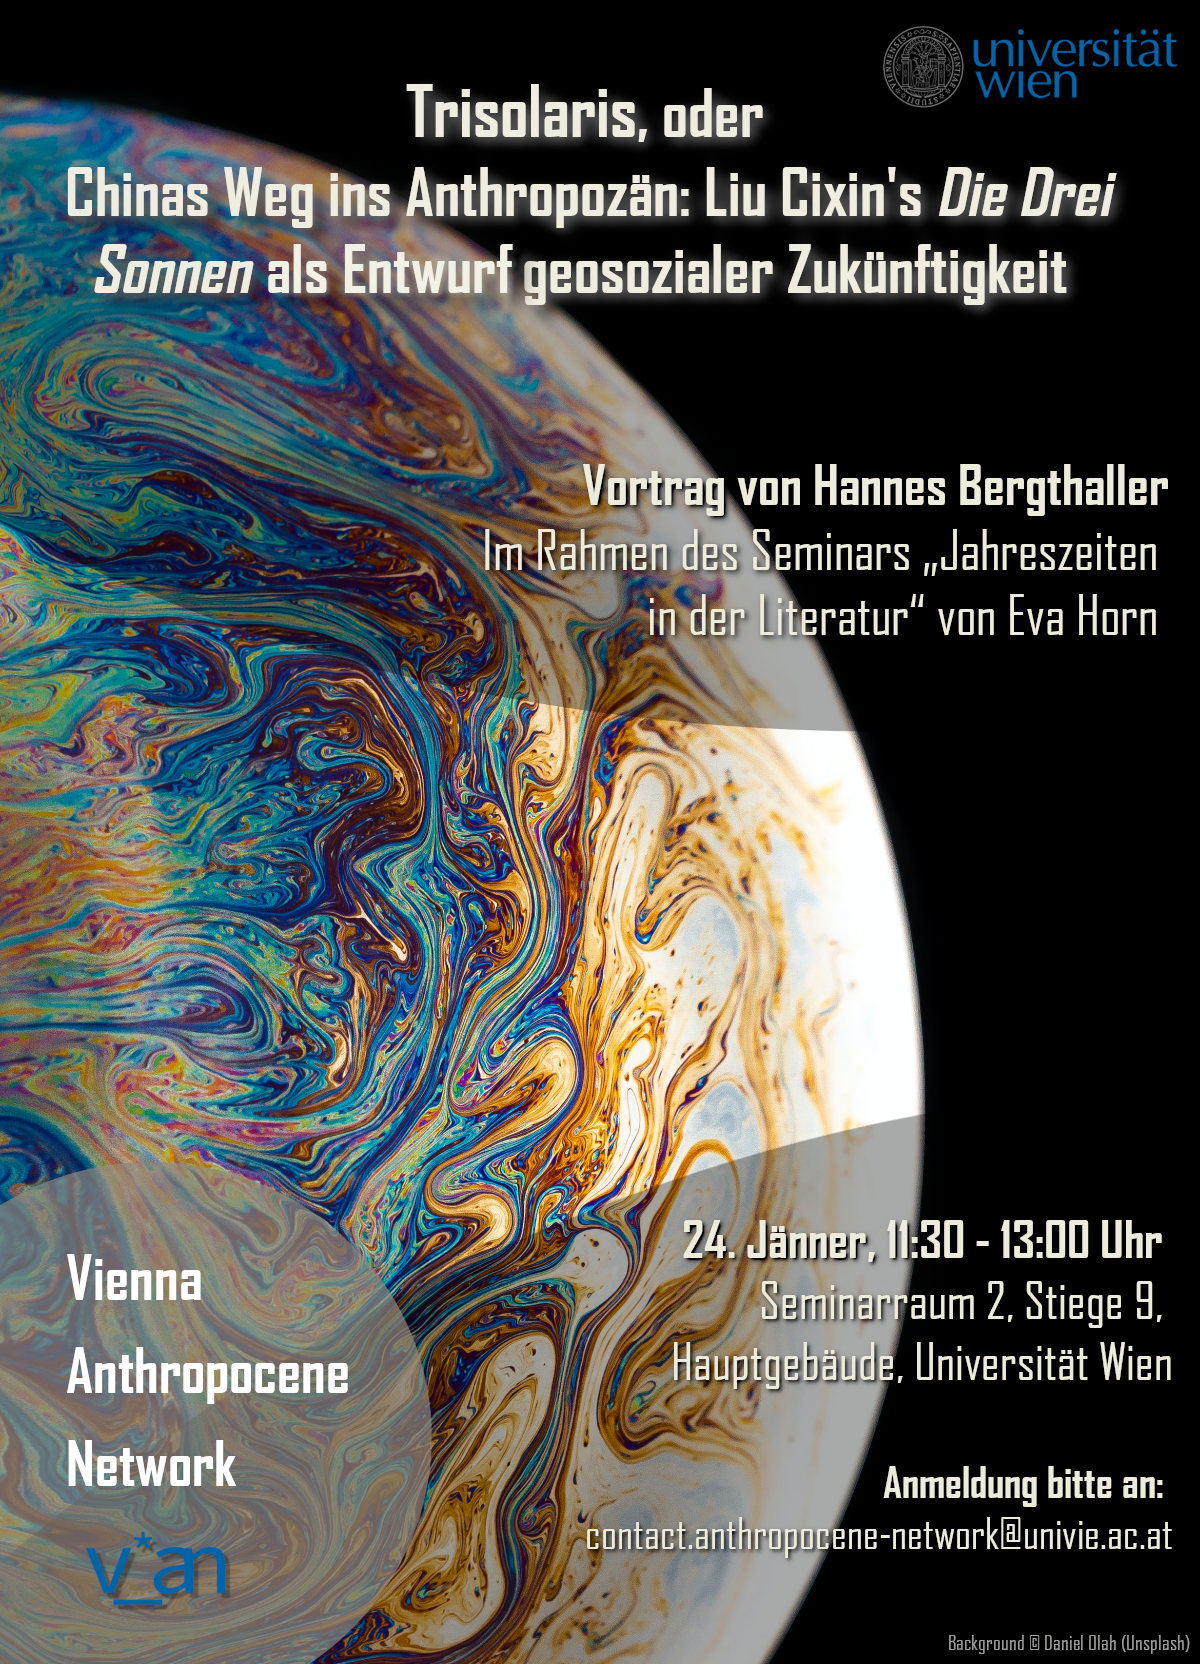 Poster for the lecture "Trisolaris" (background showing an opalescent, earth-like sphere in colours ranging from blue to gold)